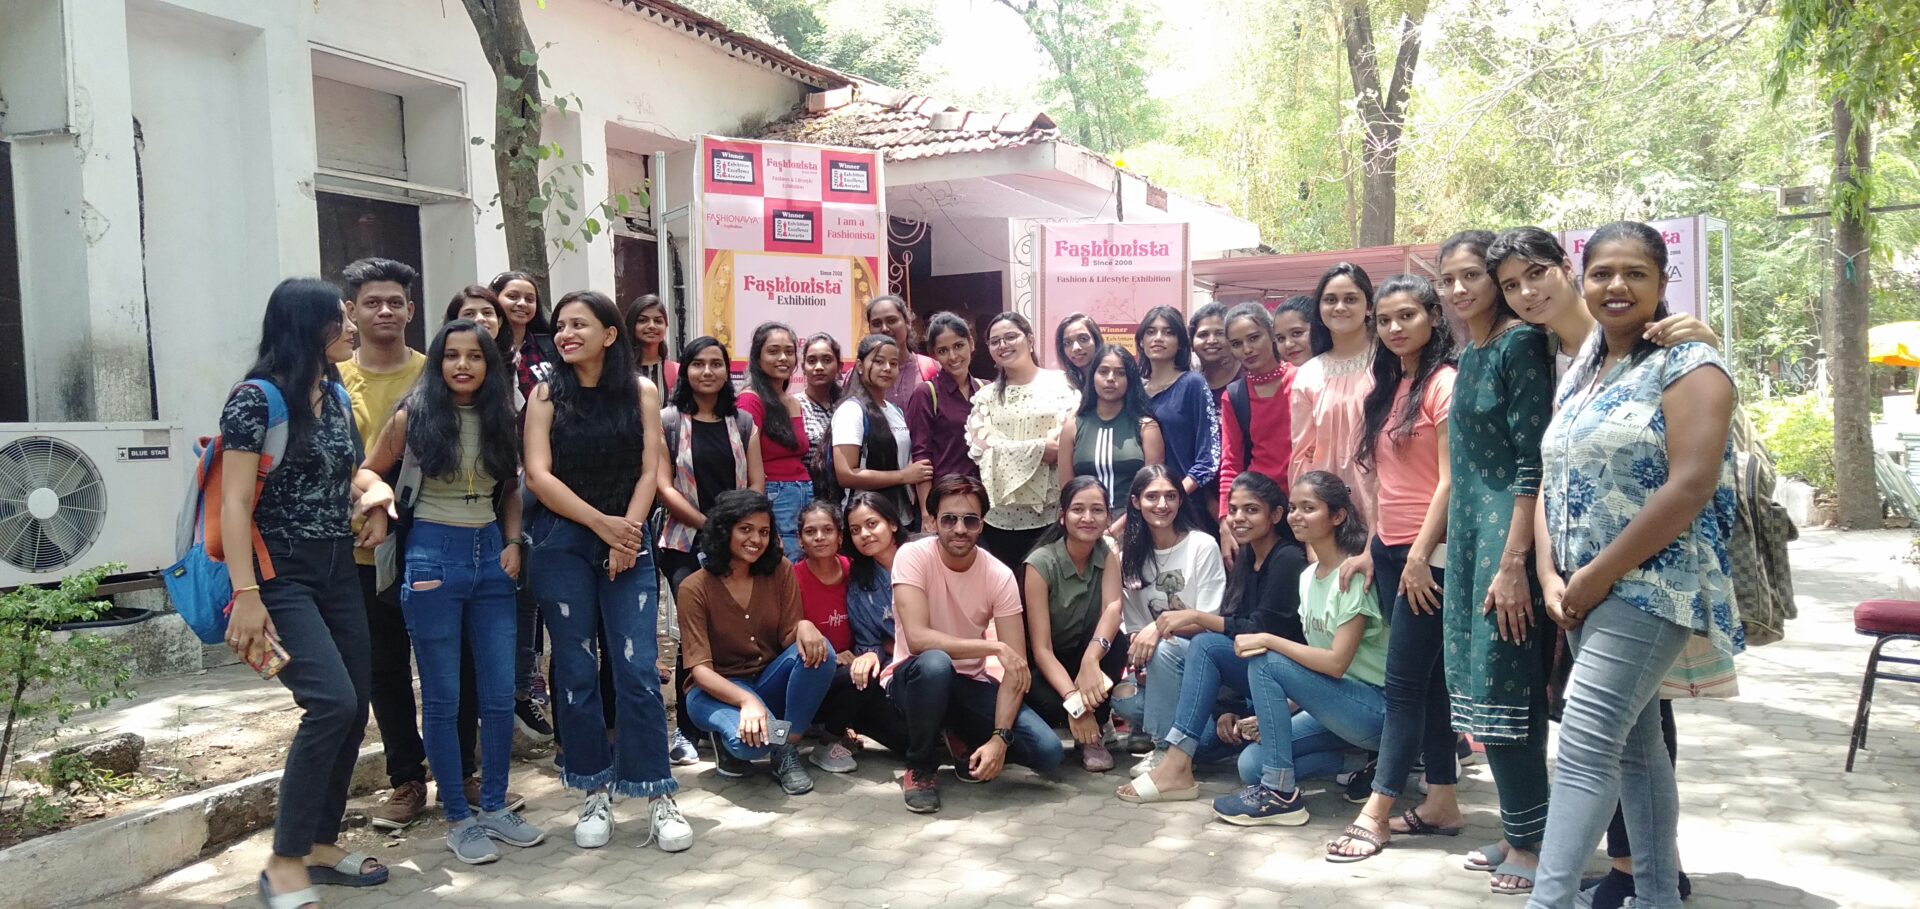 Educational Visit of students of School of Fashion Design to Fashionista Exhibition